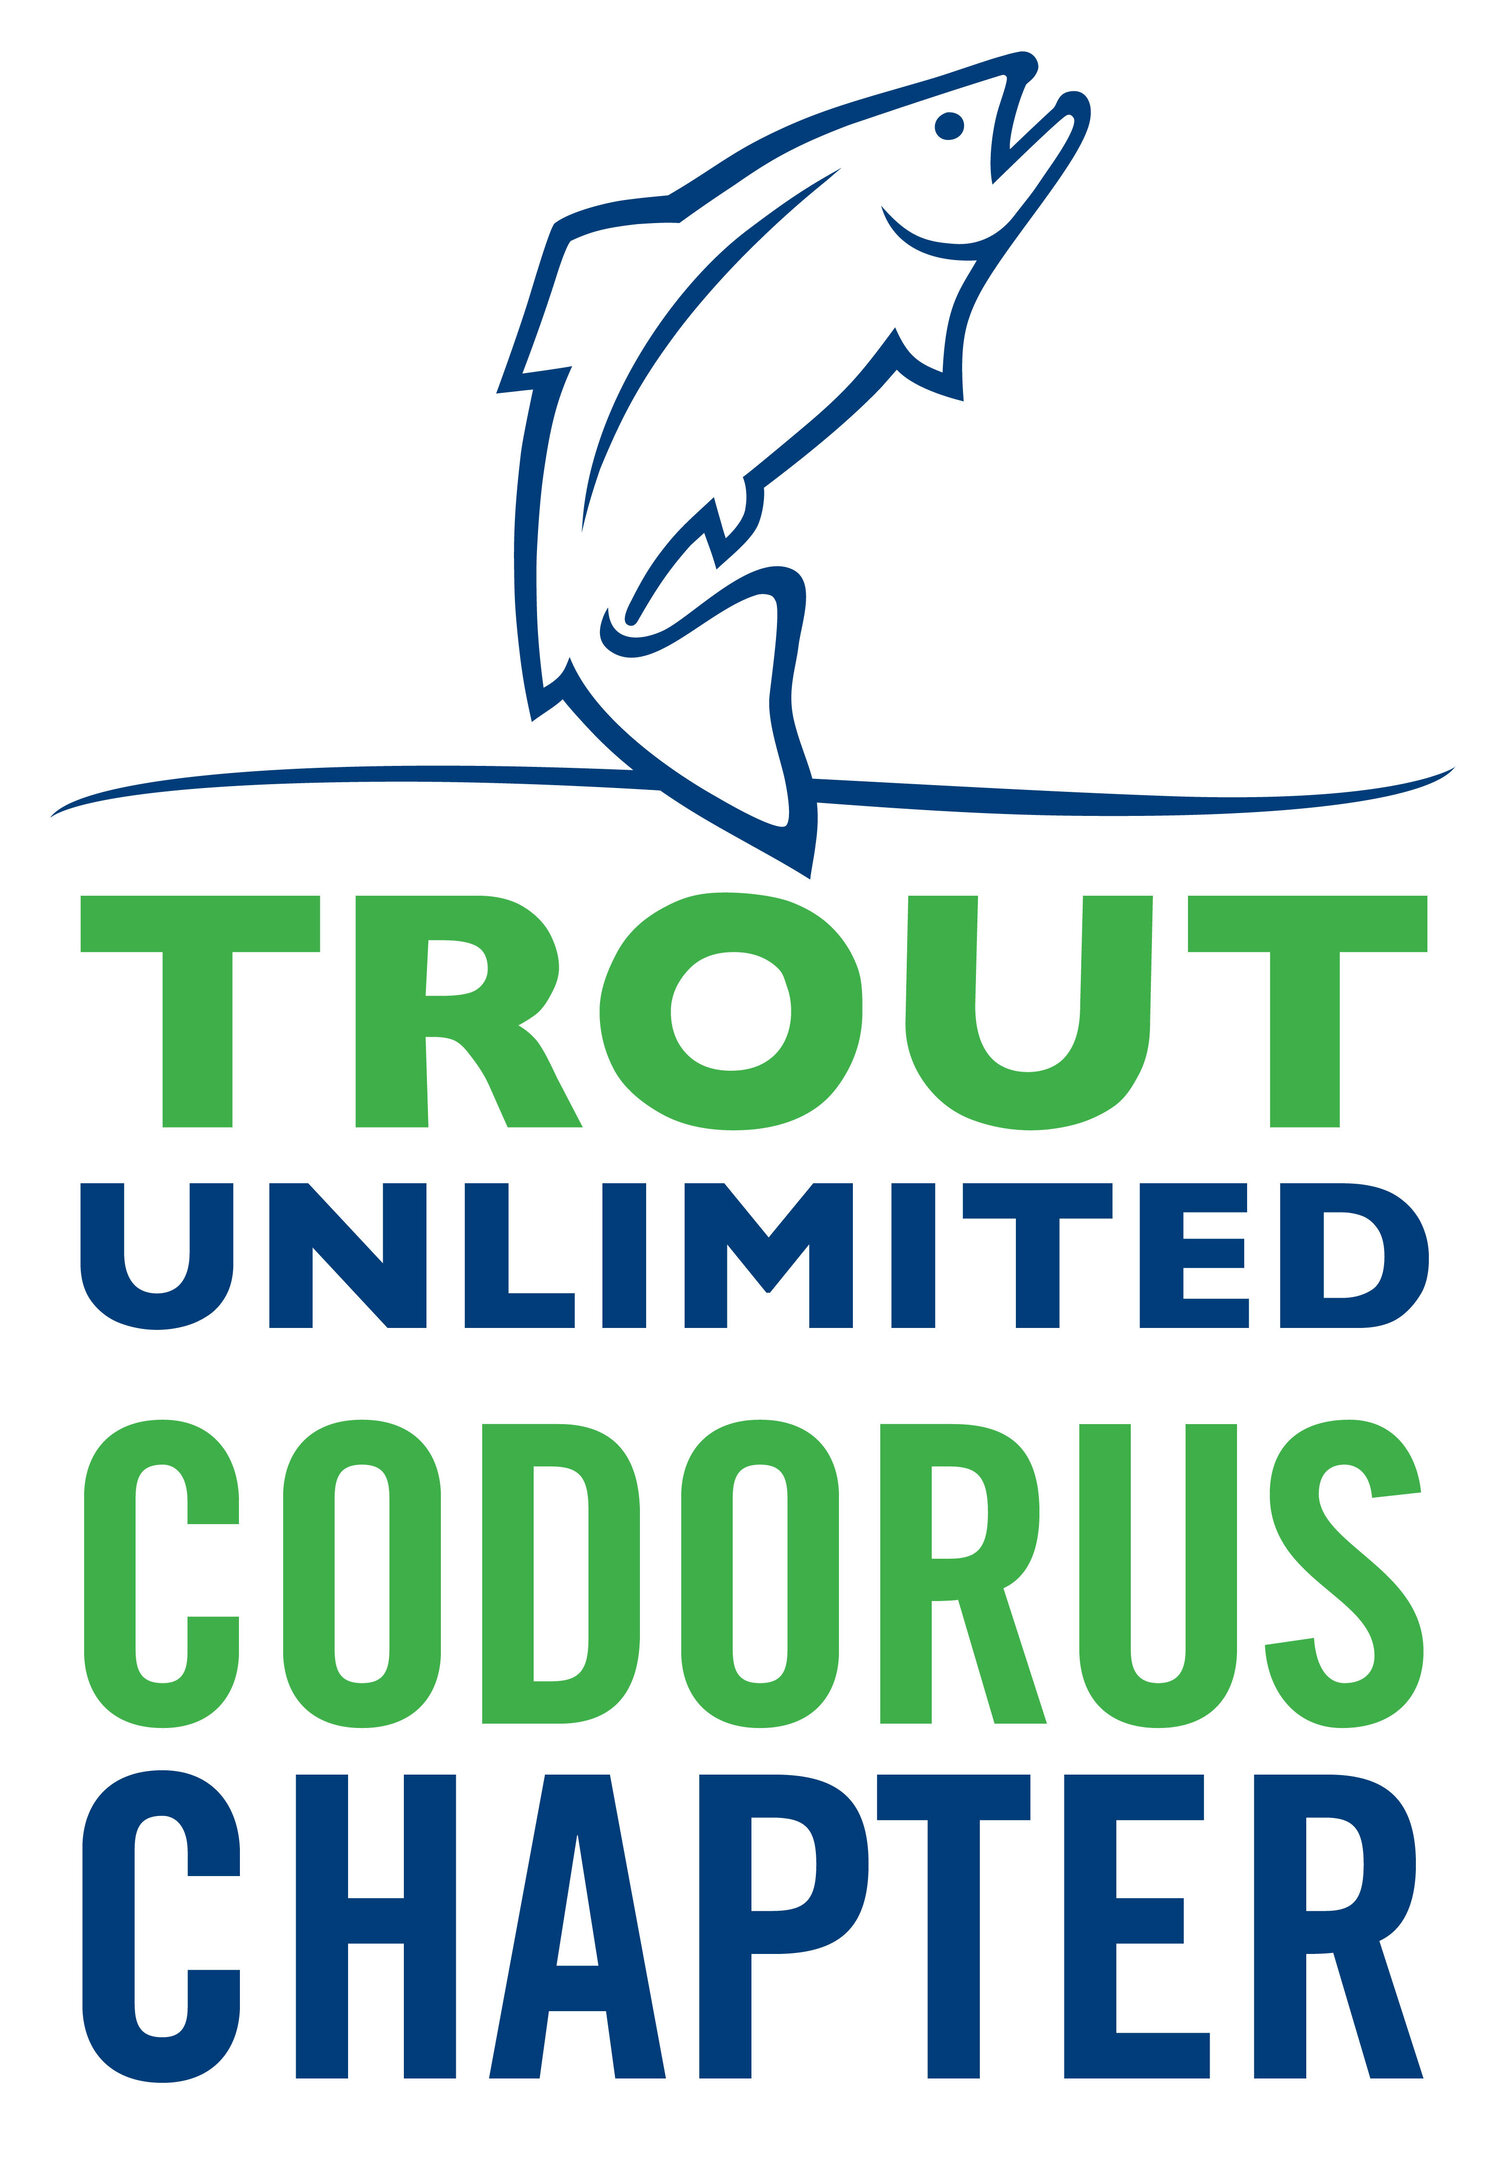 The Codorus Chapter of Trout Unlimited